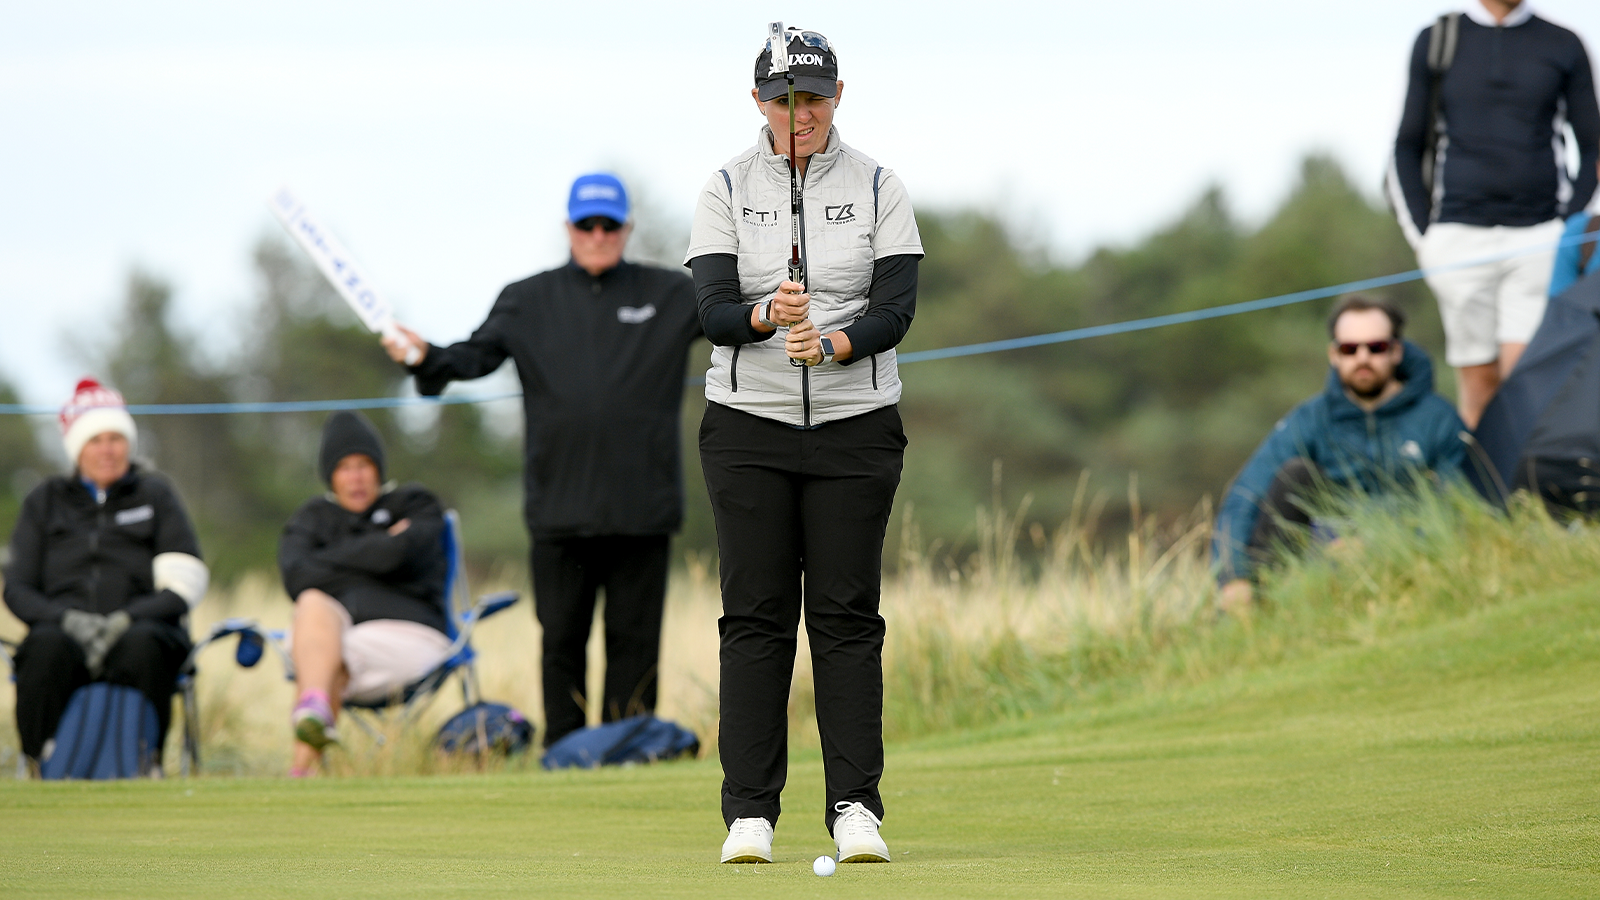 Ashleigh Buhai of South Africa plays her putt shot from the 13th hole during Day Three of the AIG Women's Open at Muirfield on August 06, 2022 in Gullane, Scotland. (Photo by Octavio Passos/Getty Images)